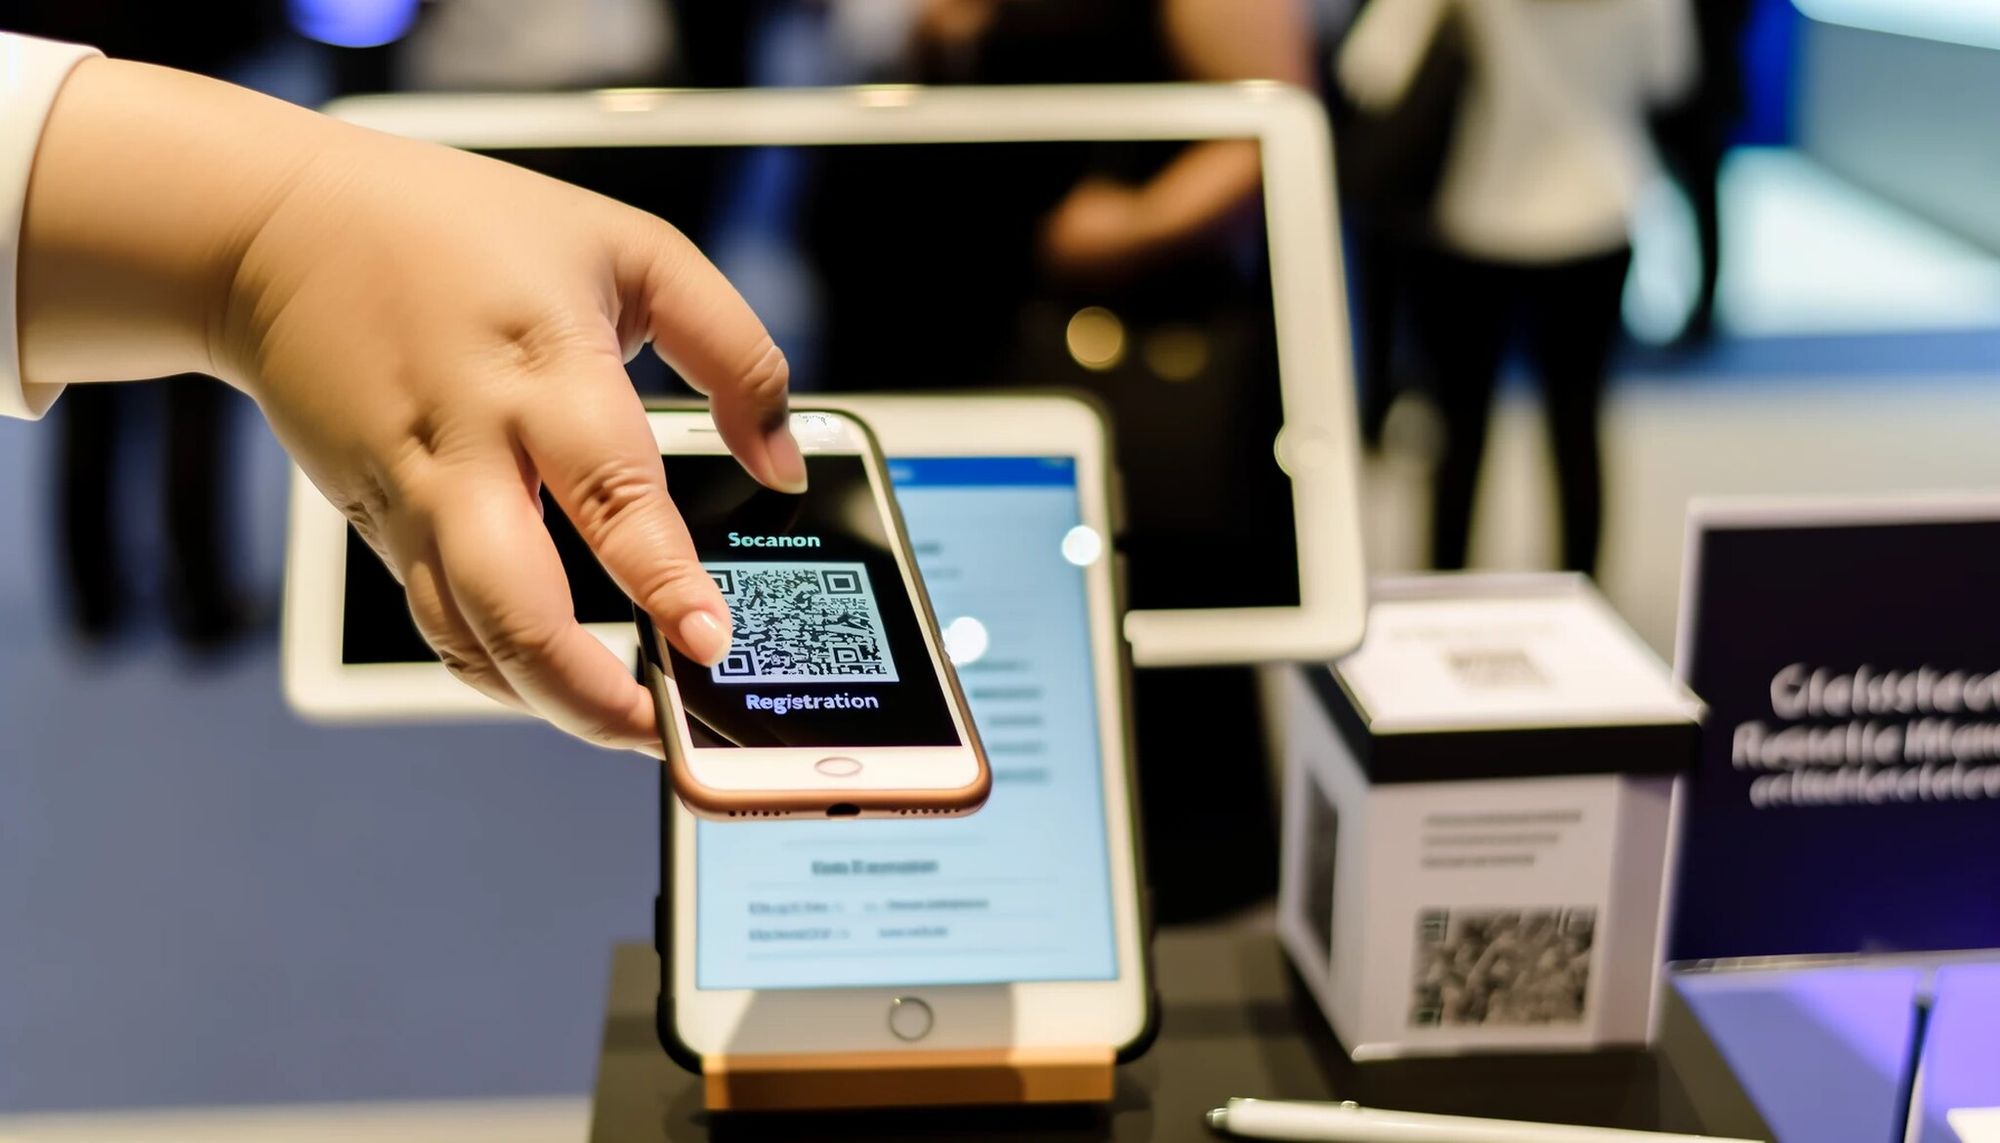 A close-up view of a person's hand holding a smartphone, and scanning a QR code for registration 